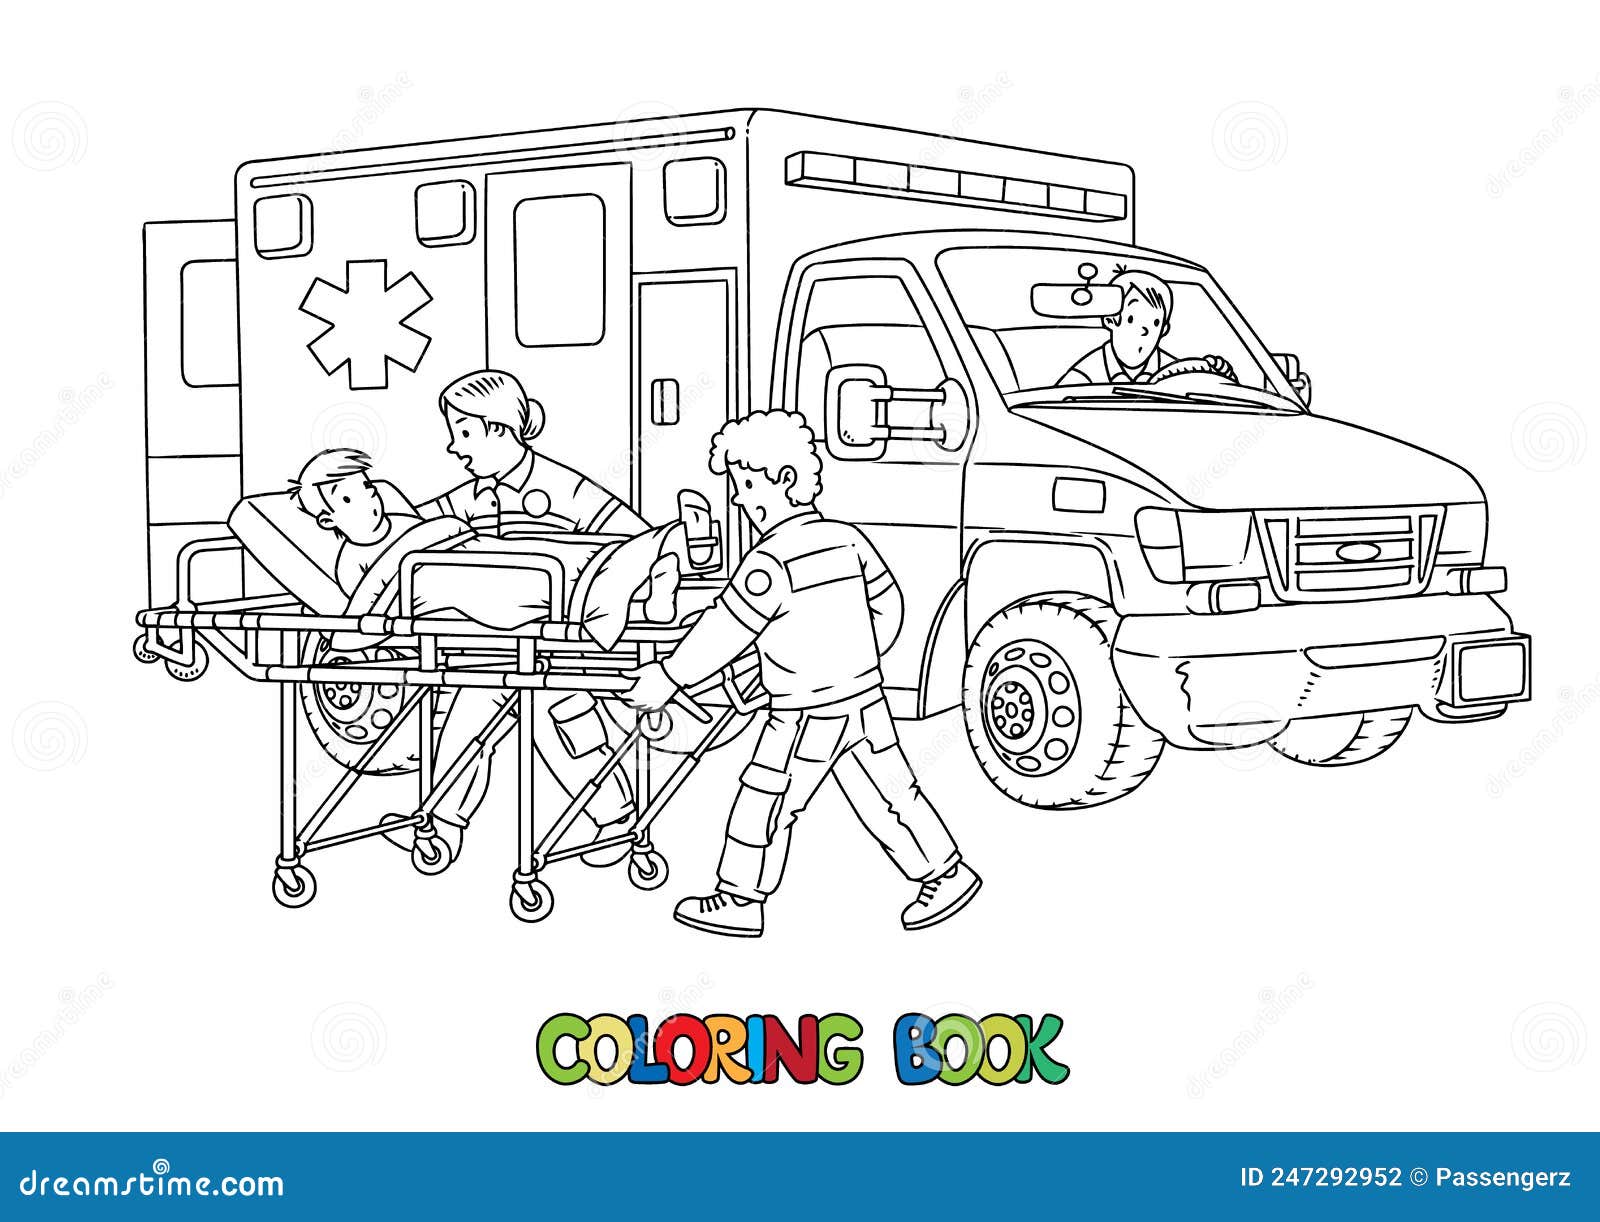 Paramedic coloring page stock illustrations â paramedic coloring page stock illustrations vectors clipart